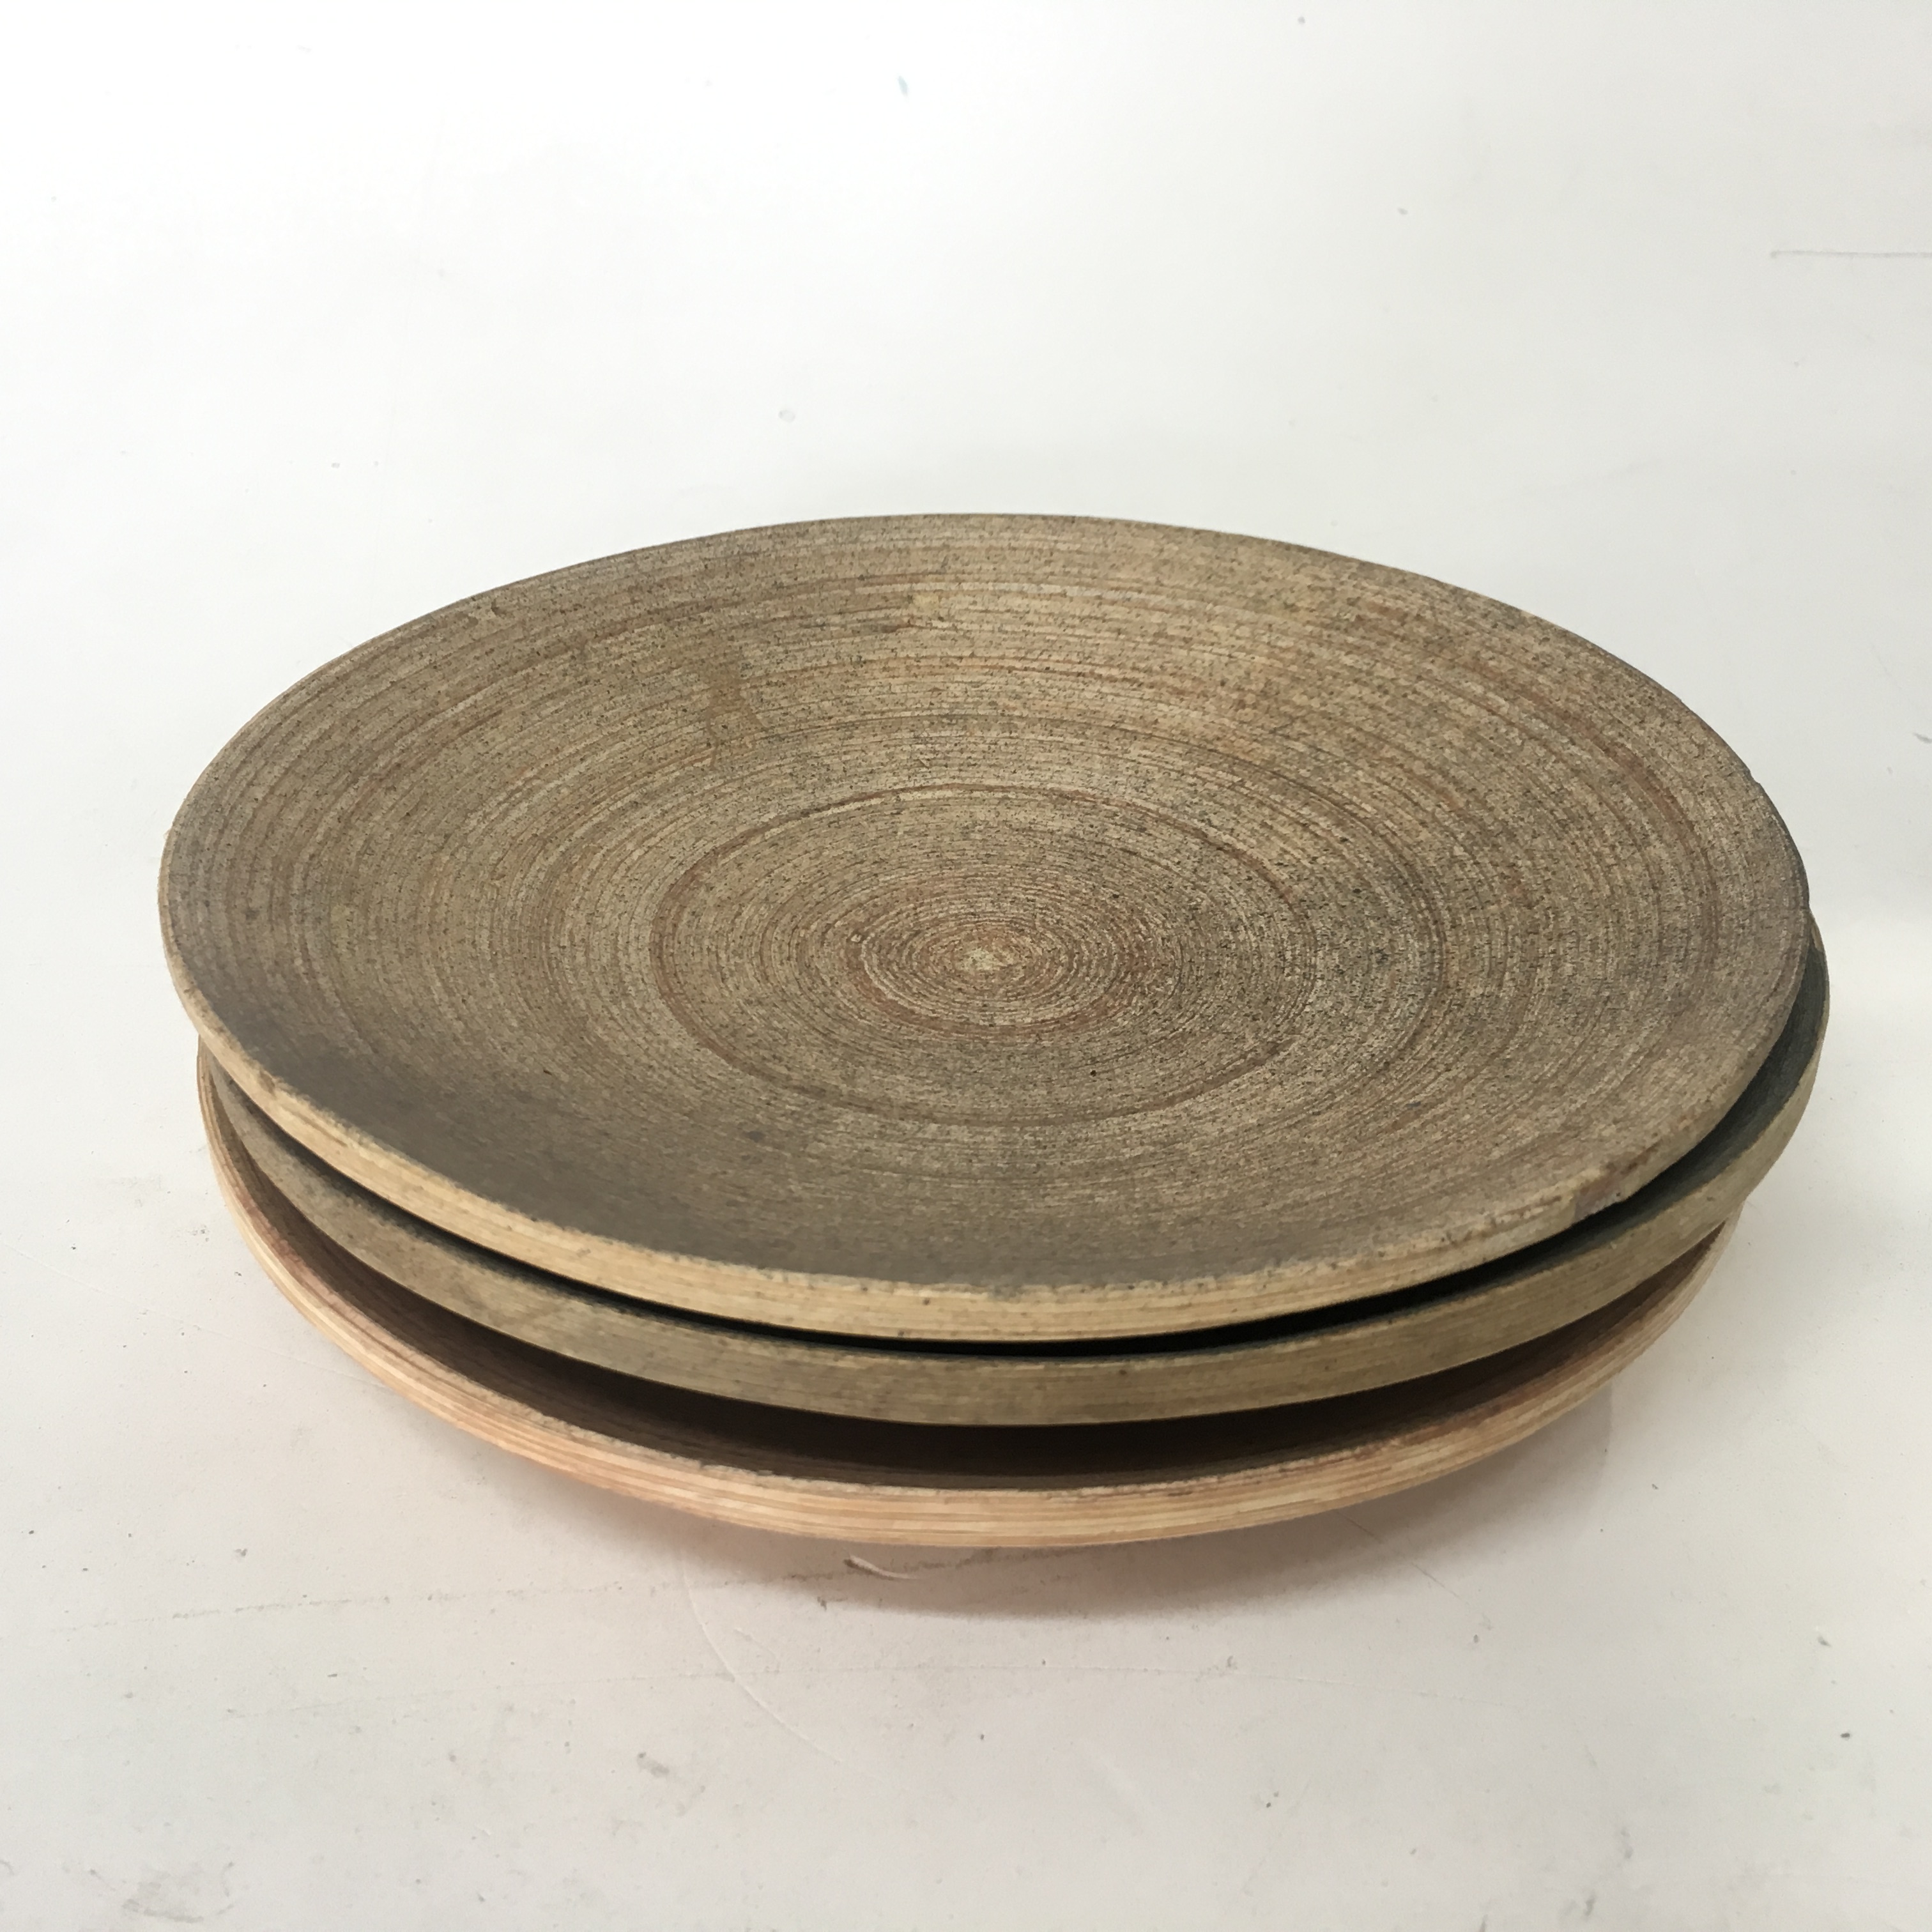 PLATE, Wooden Side Plate - Aged 